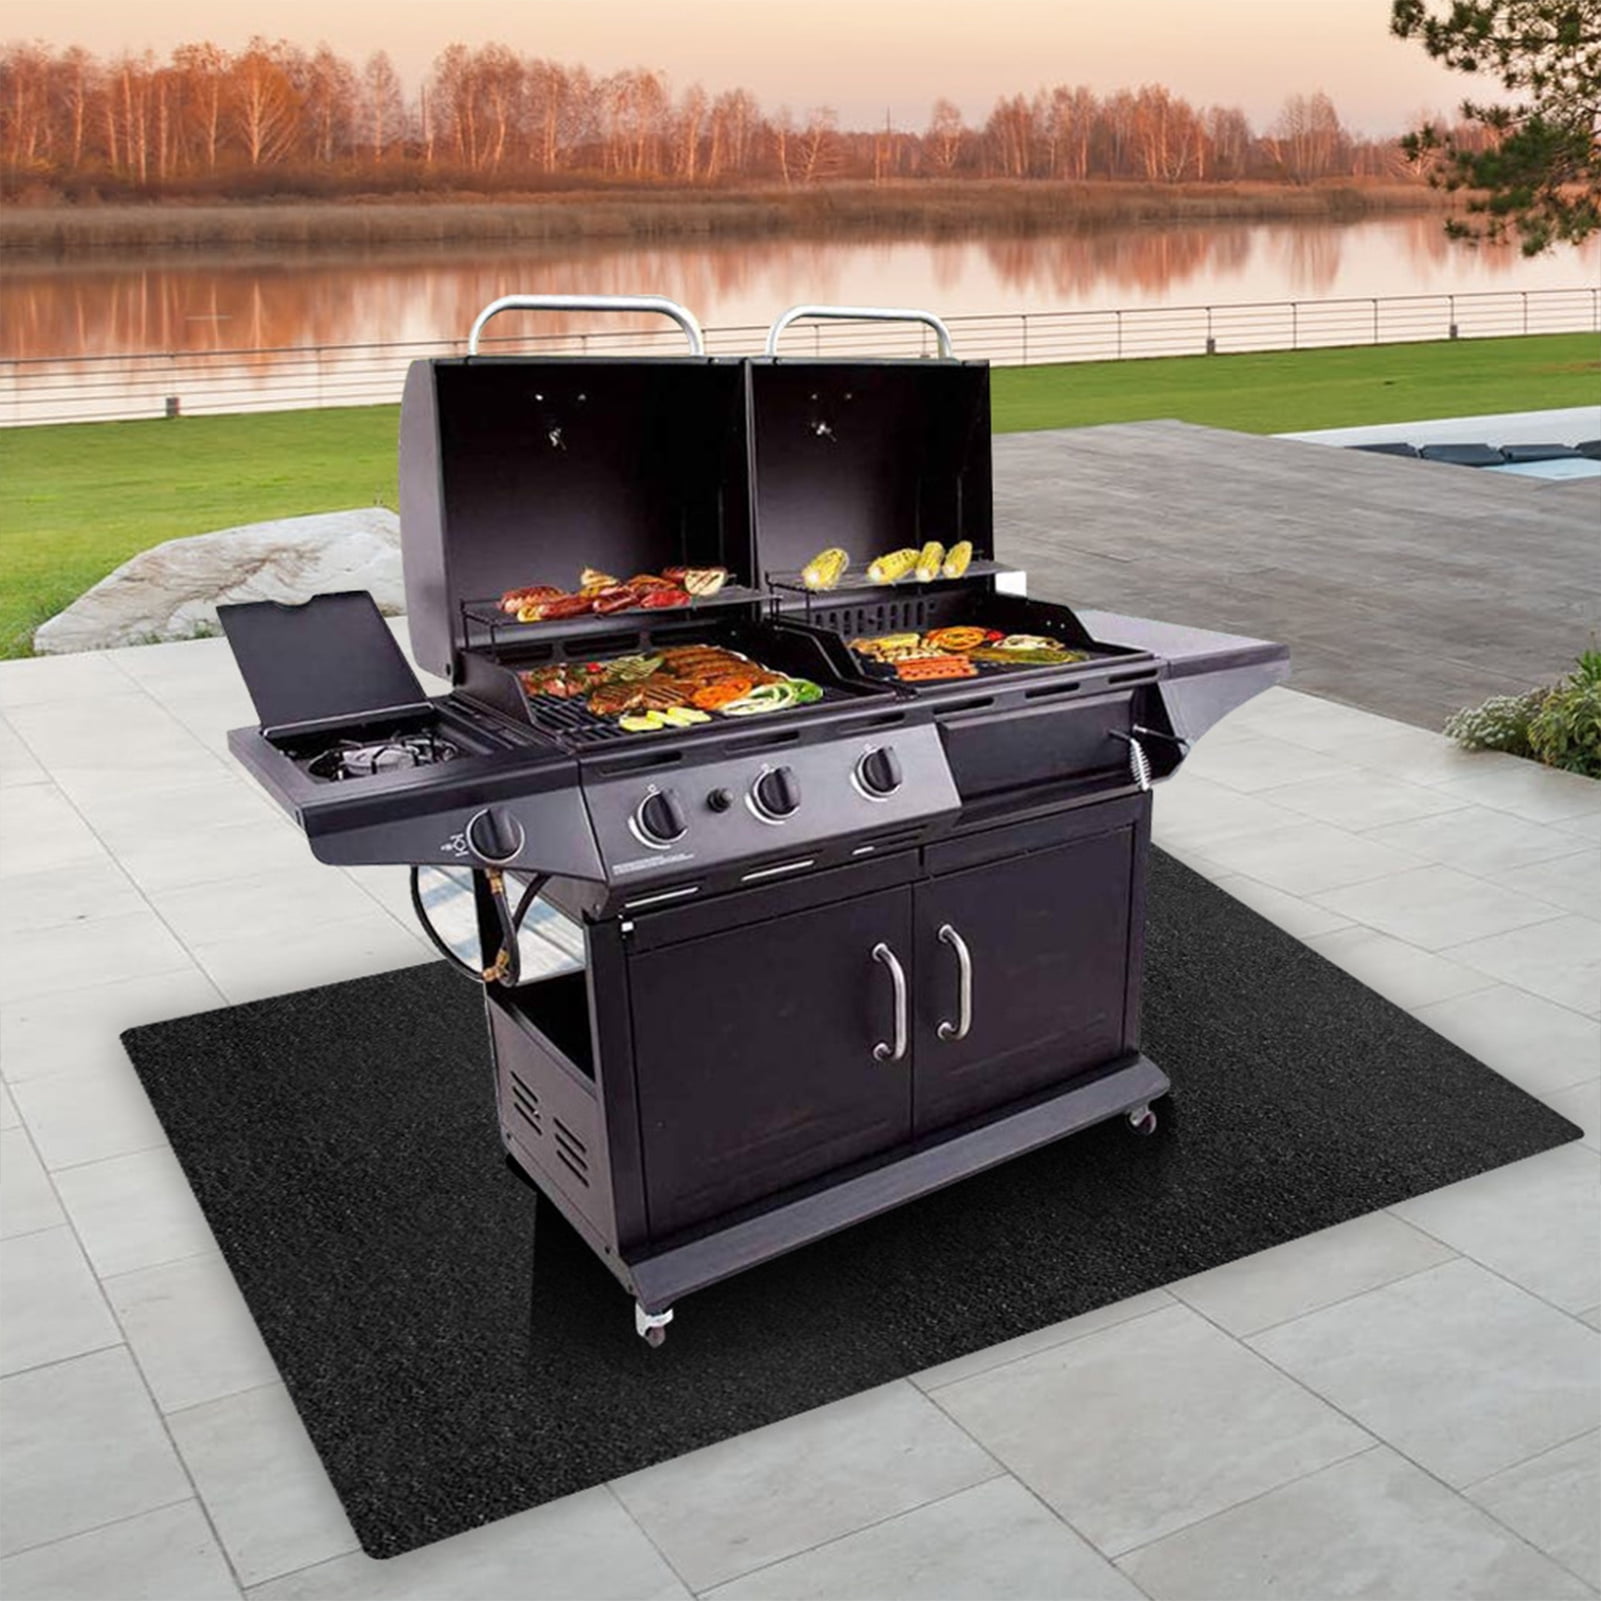 Details about   Rectangular Fireproof Mat Barbecue Mat Prevents Damage To The Floor Lawn 